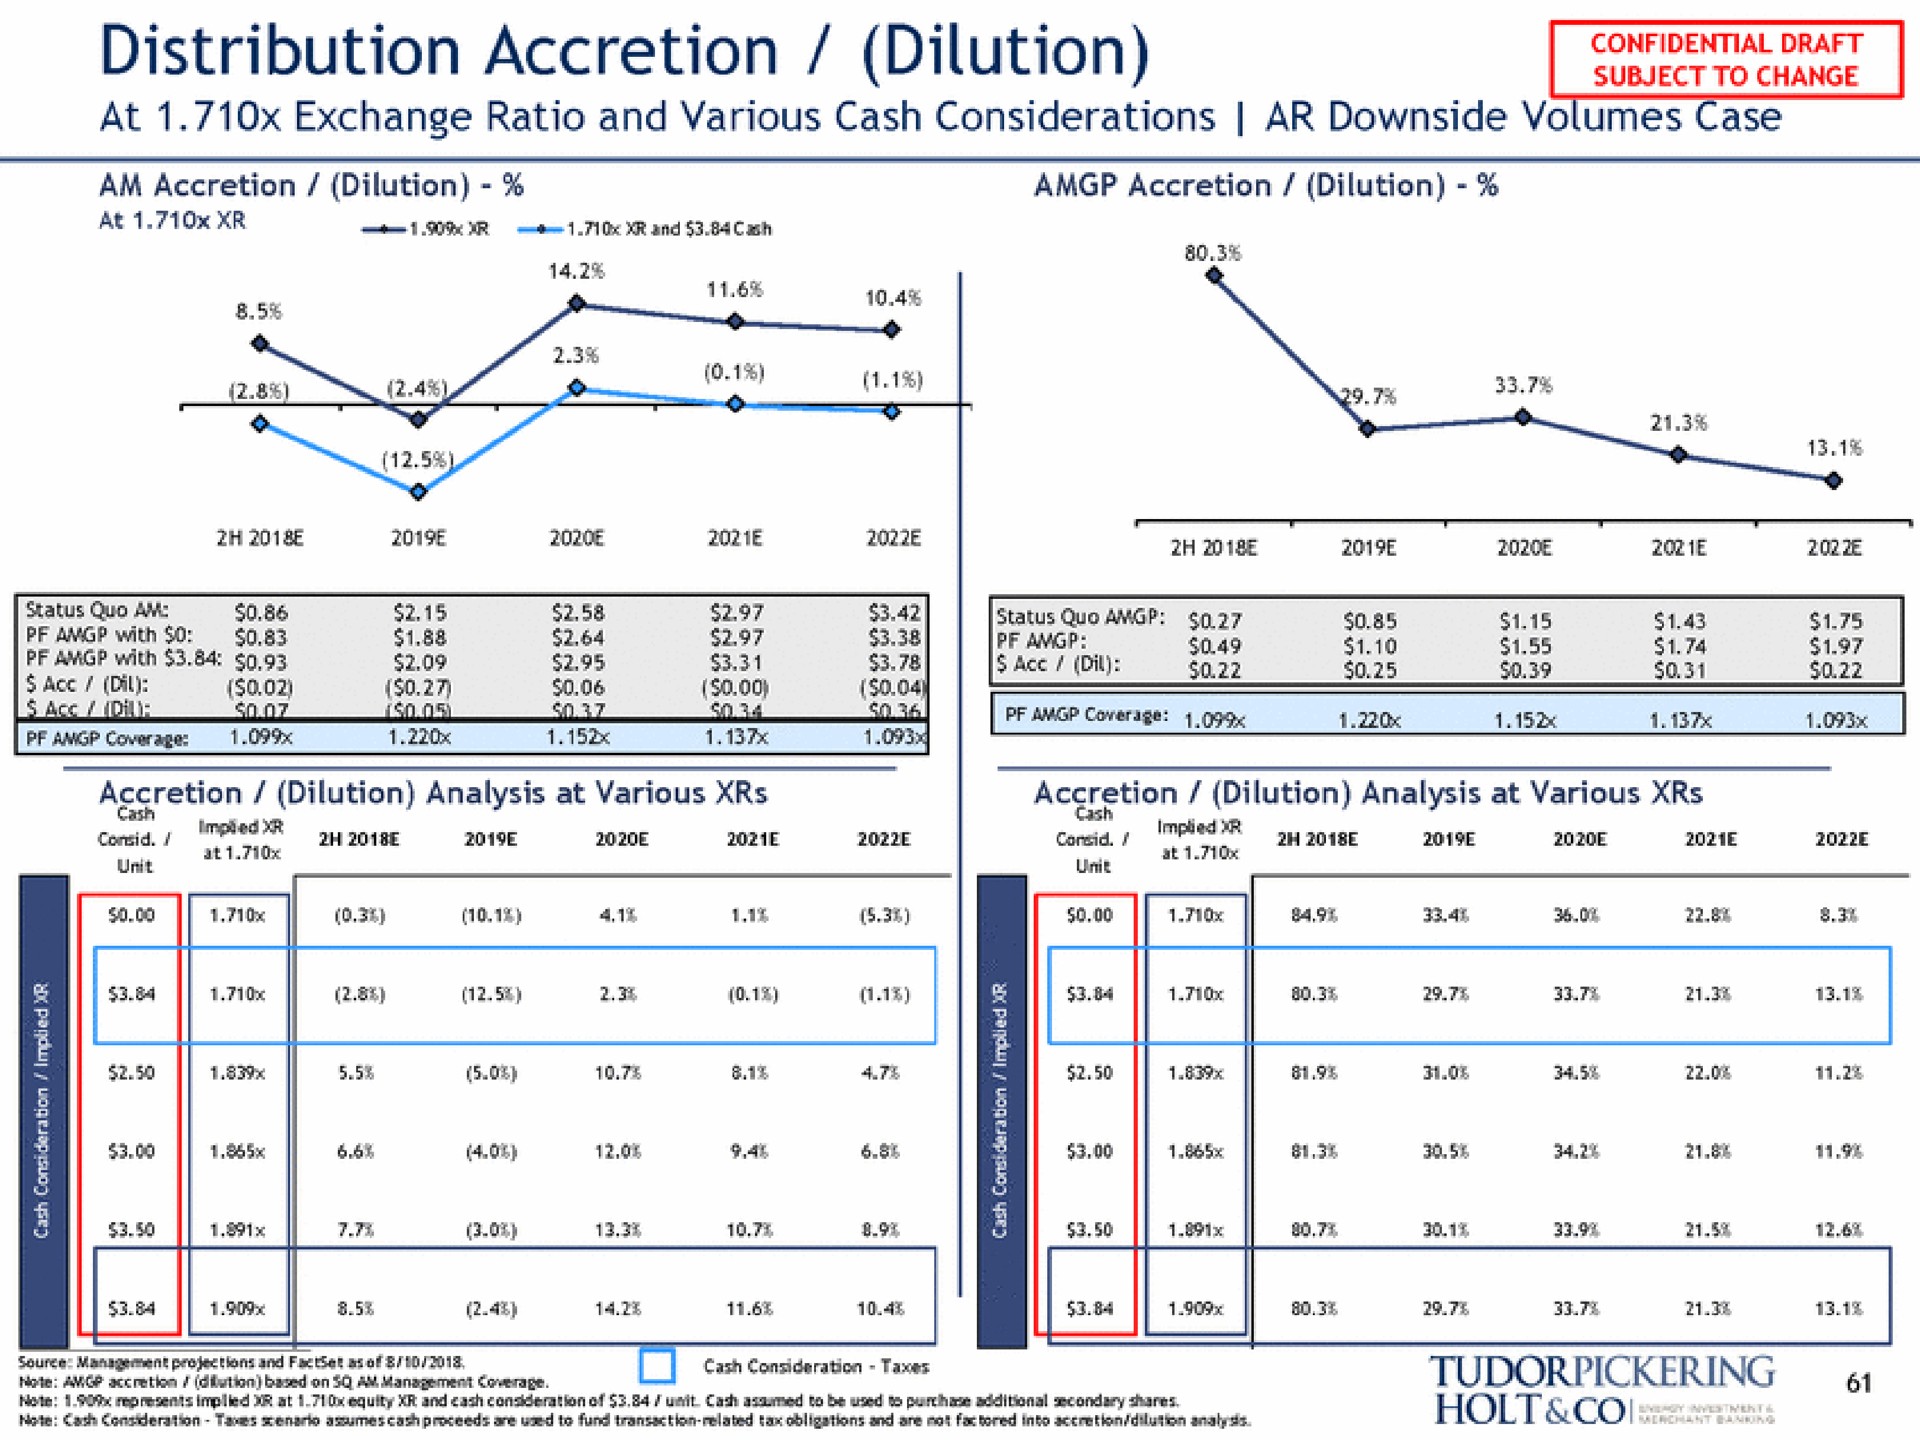 distribution accretion dilution at exchange ratio and various cash considerations downside volumes case | Tudor, Pickering, Holt & Co